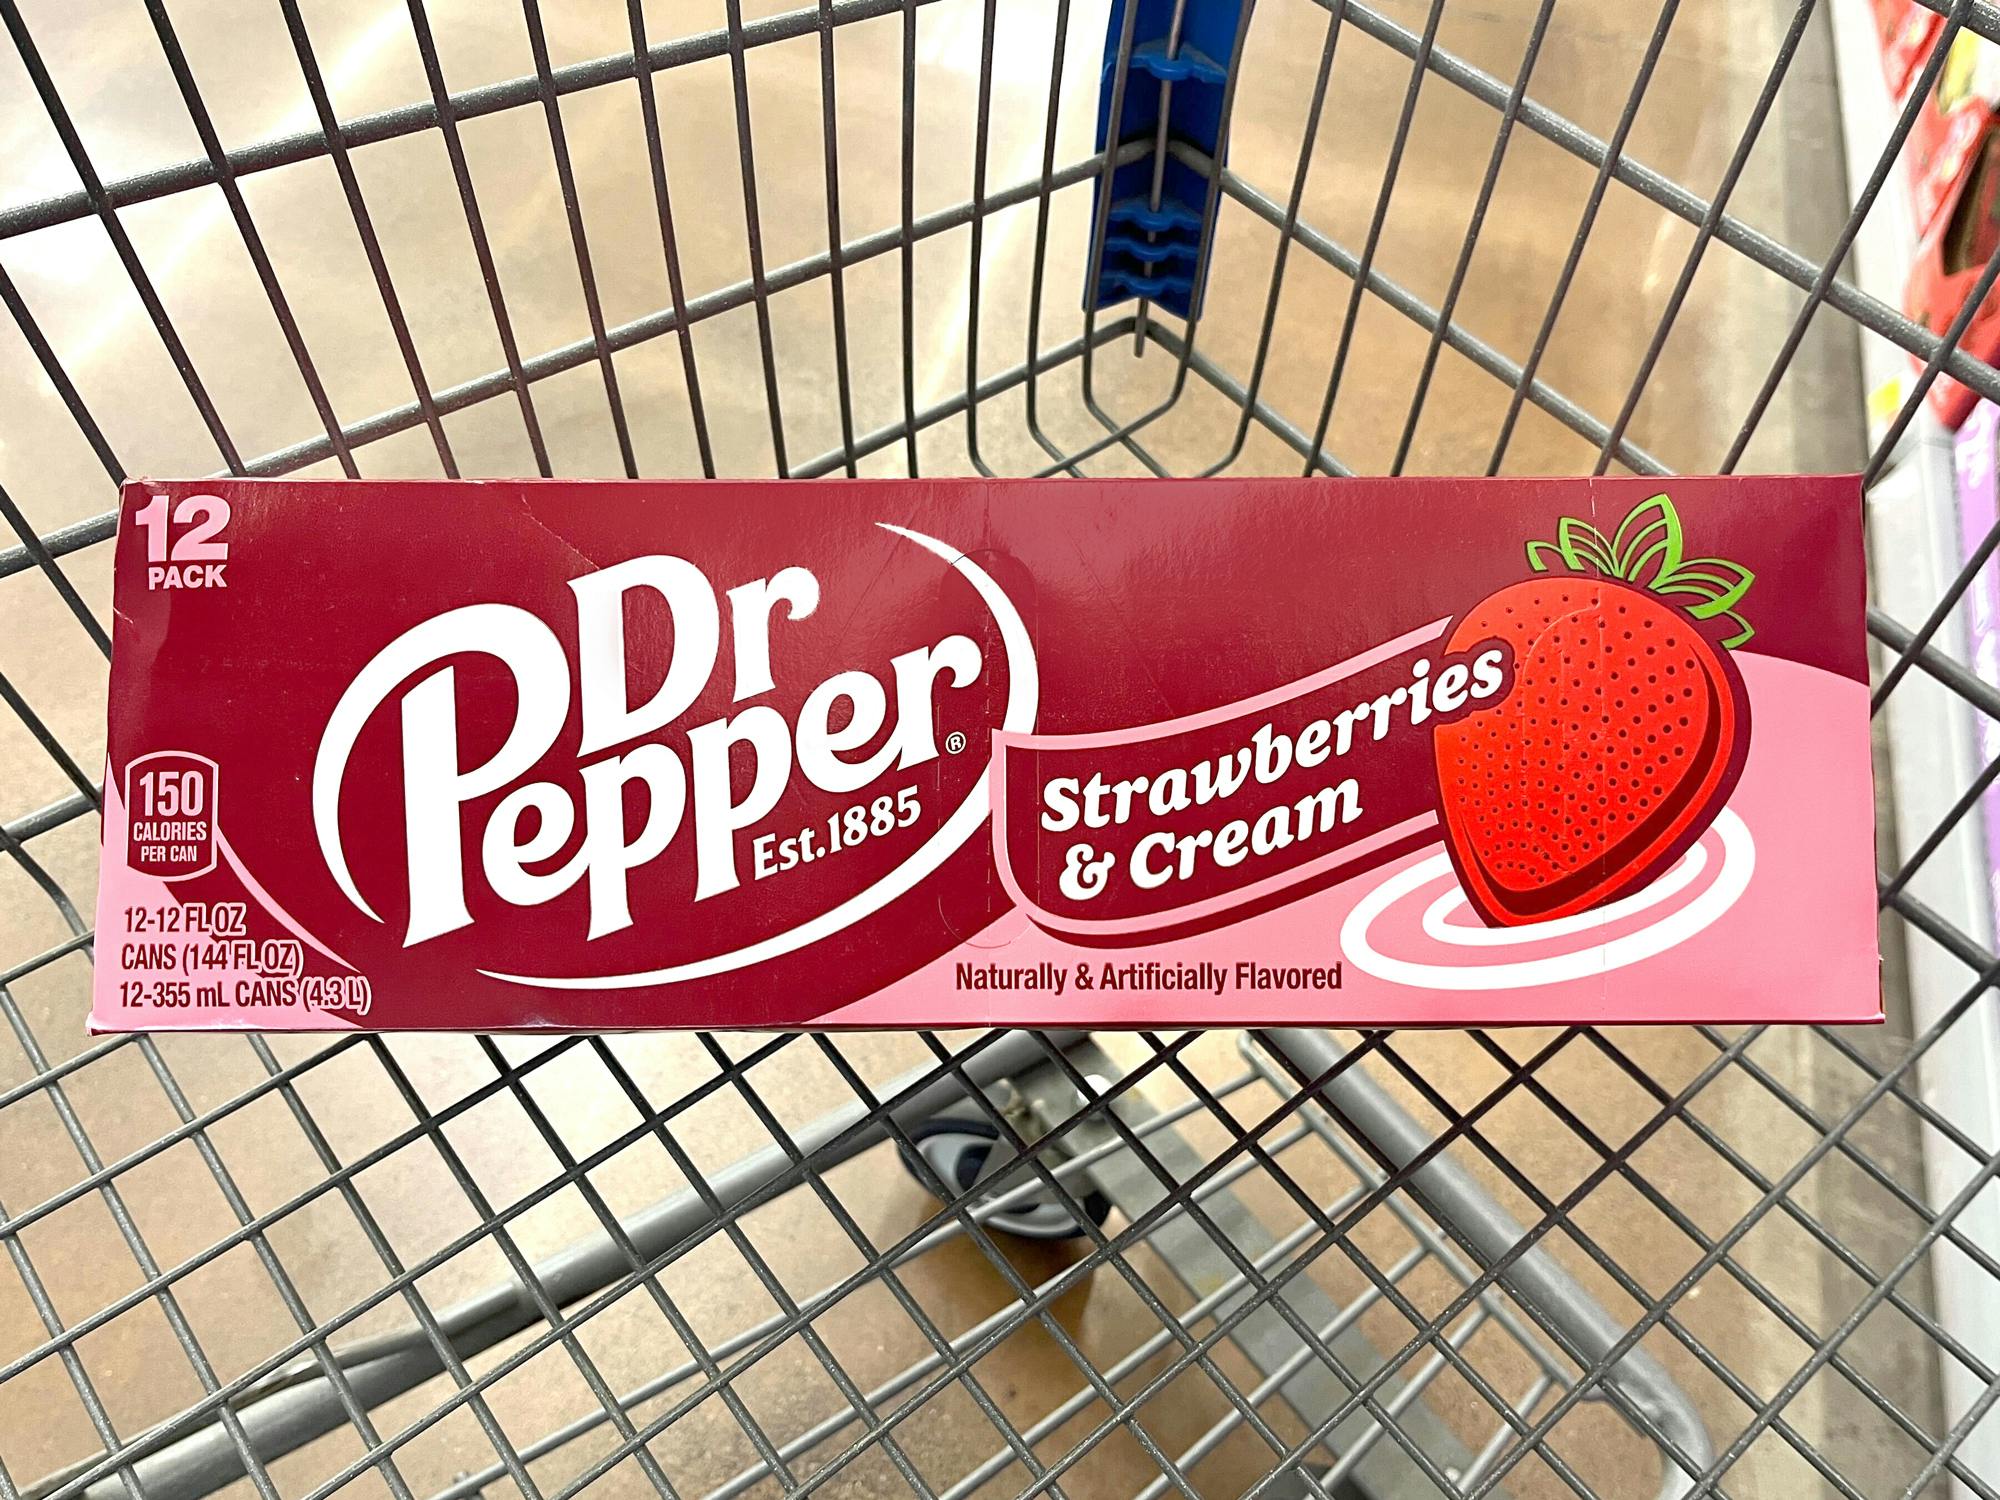 The new Dr Pepper Strawberries and Cream flavored soda in a cart